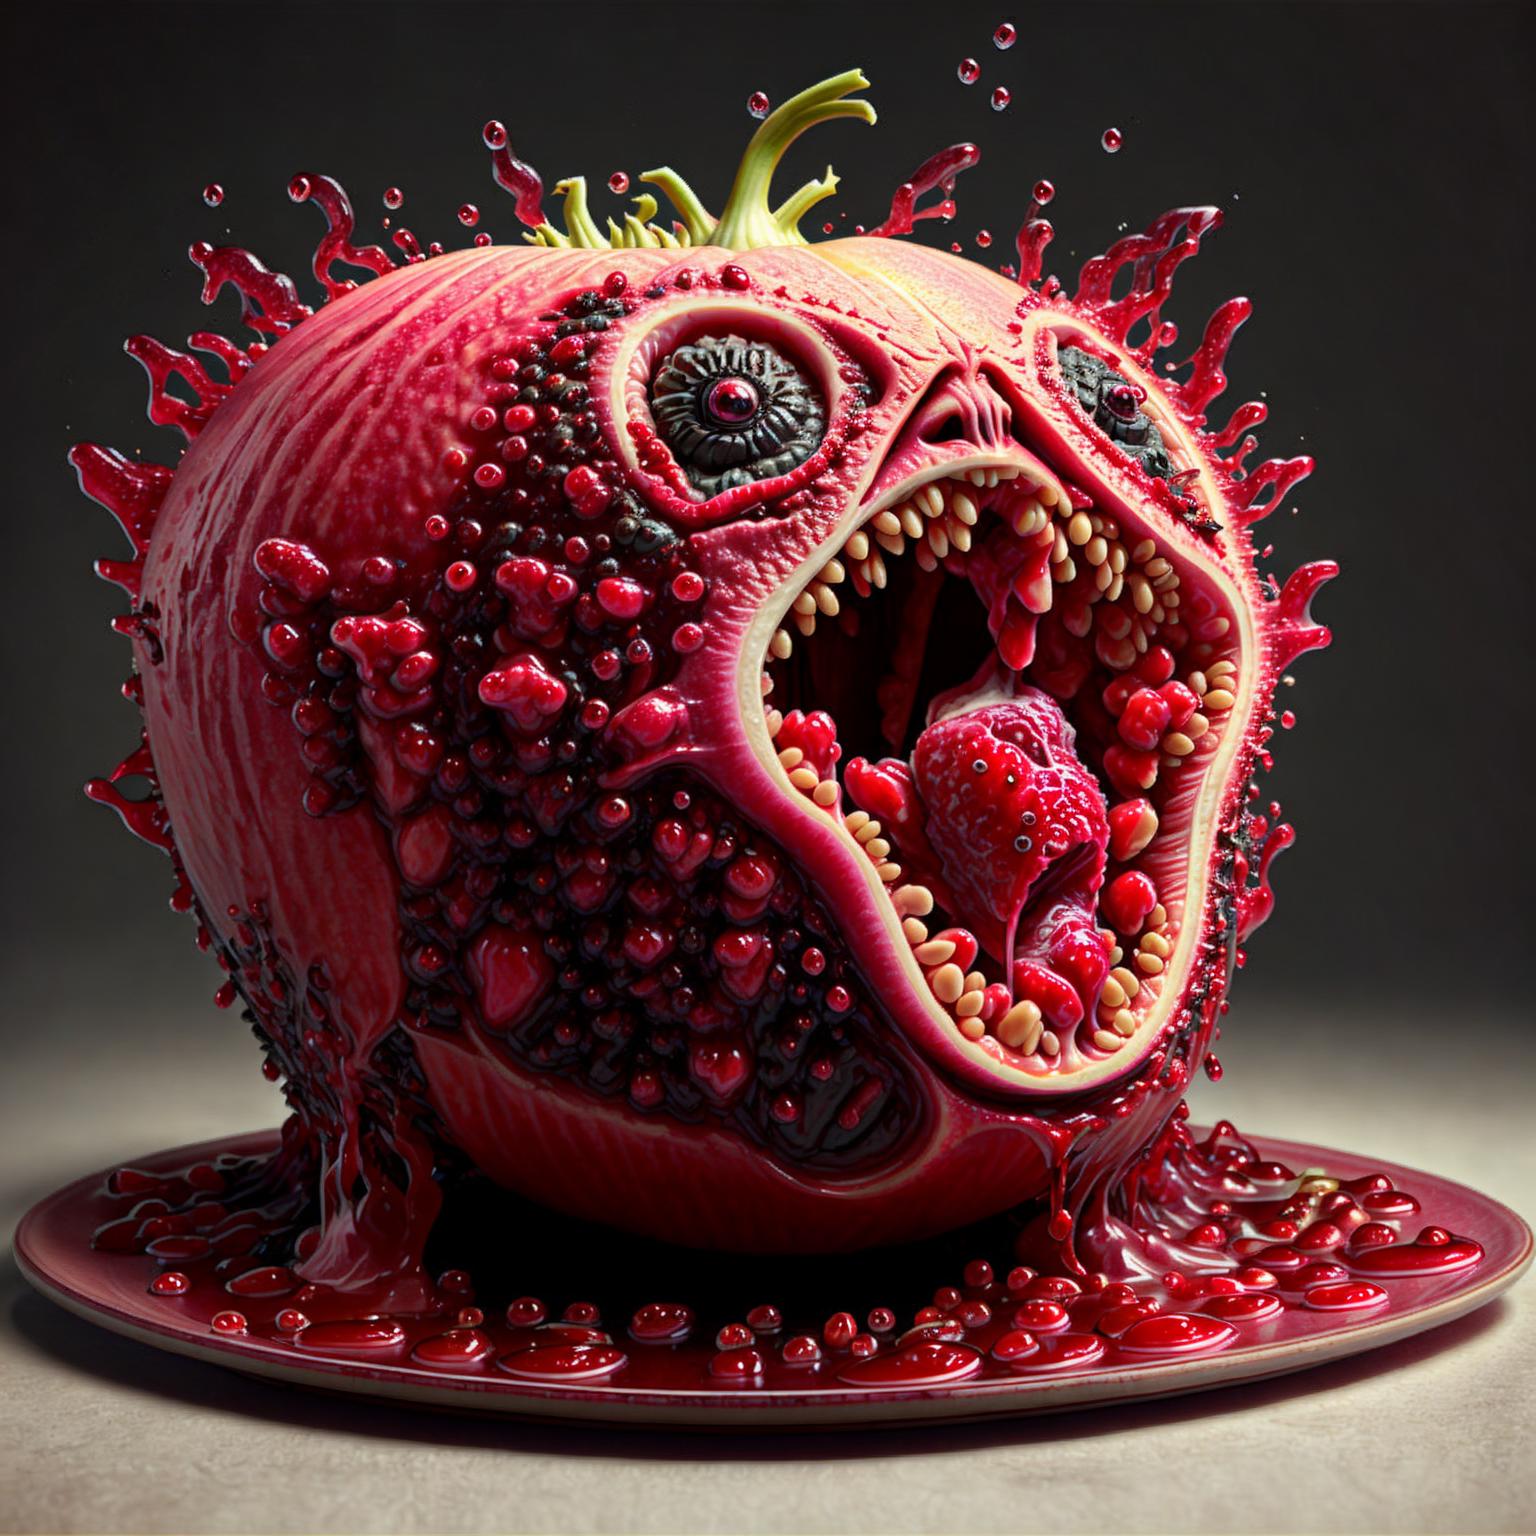 Fruity Nightmare image by woobly